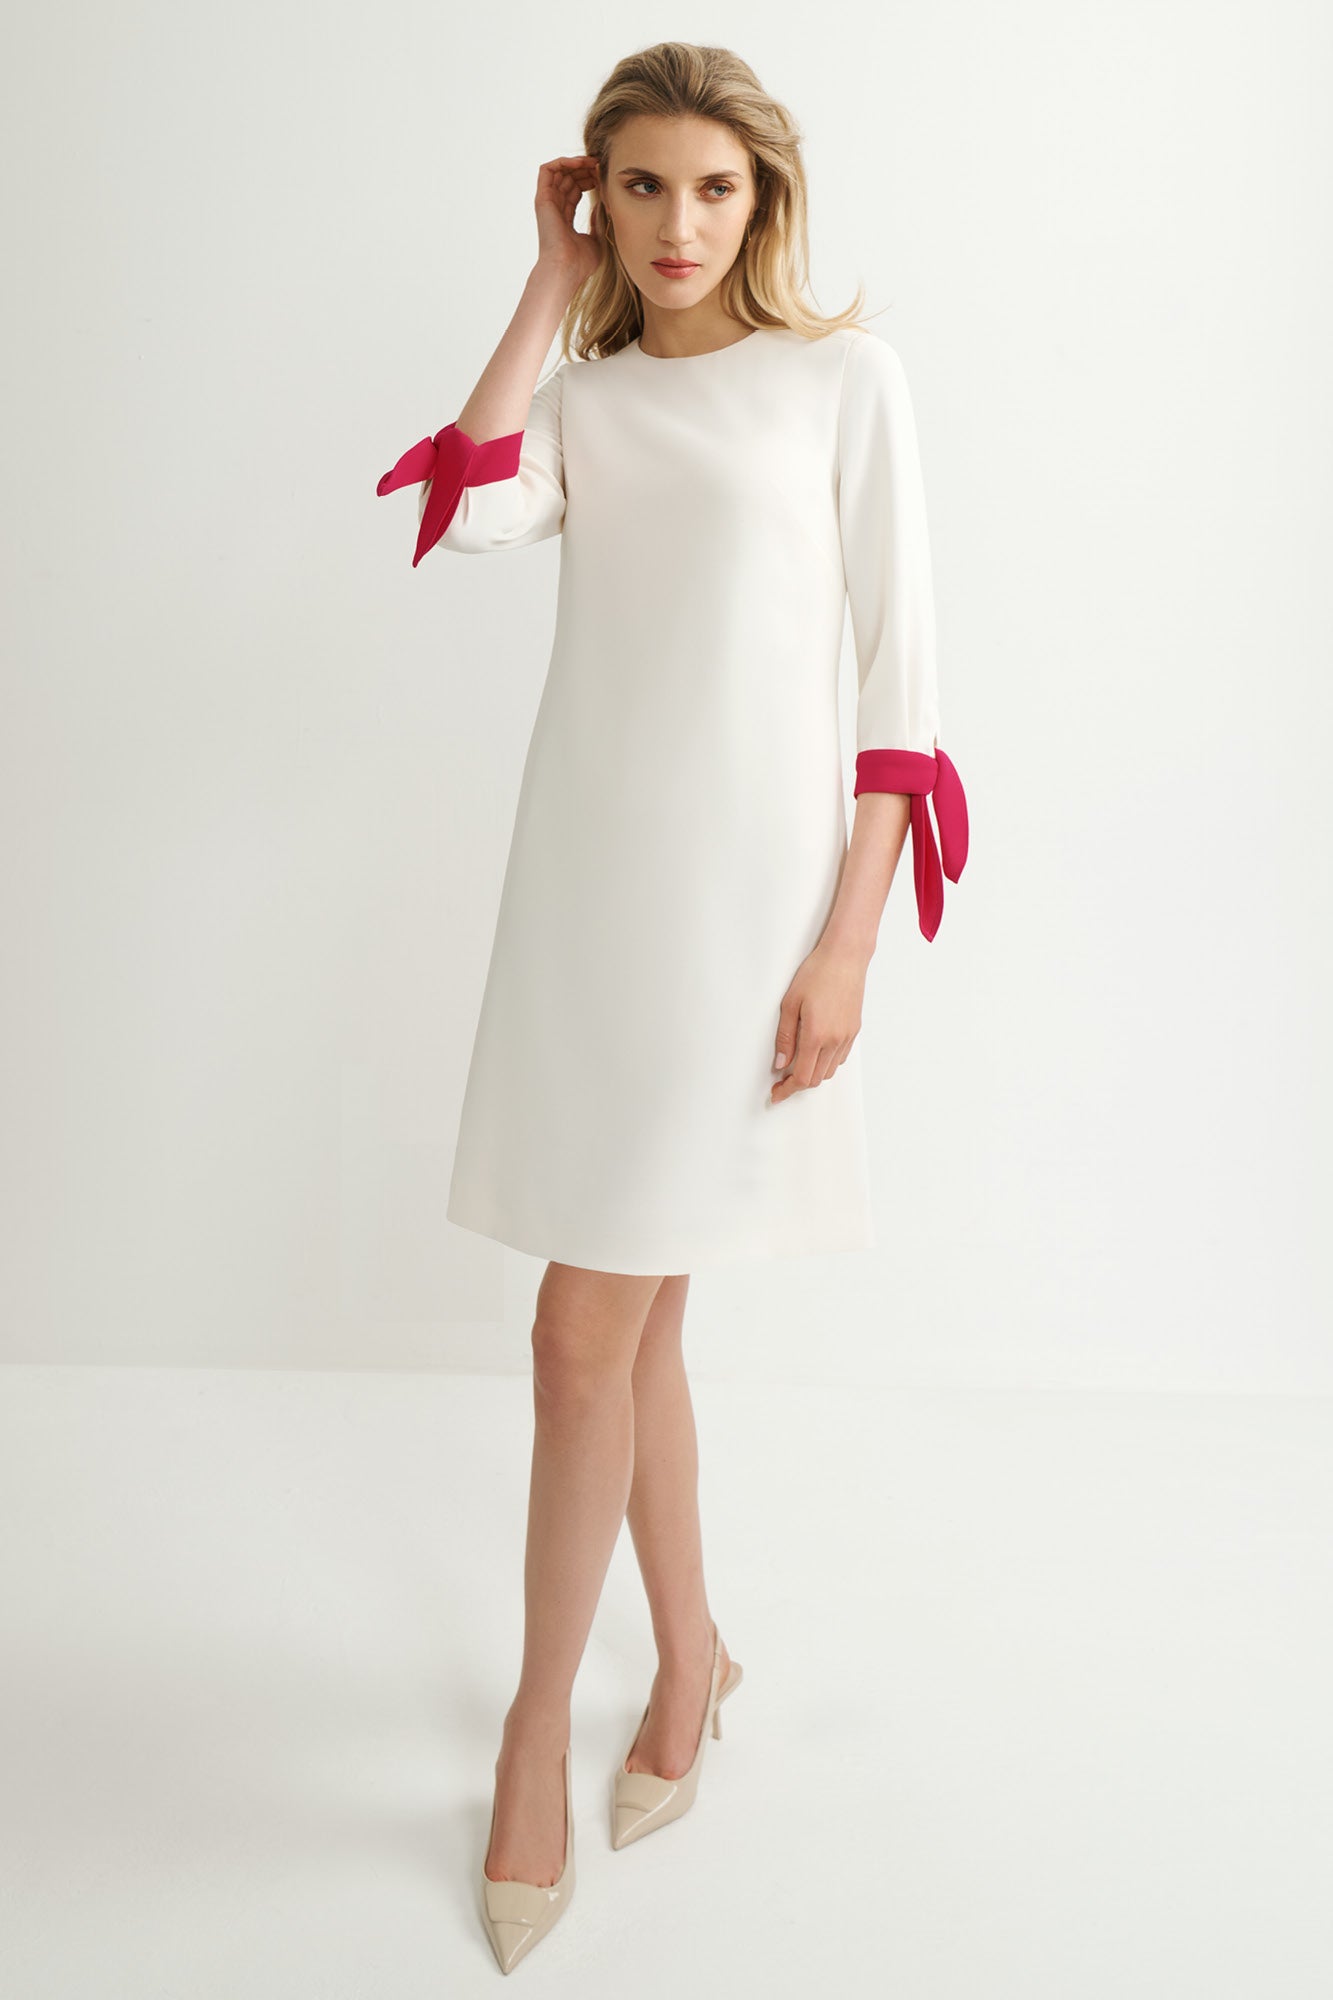 Padstow Ivory and Pink Dress